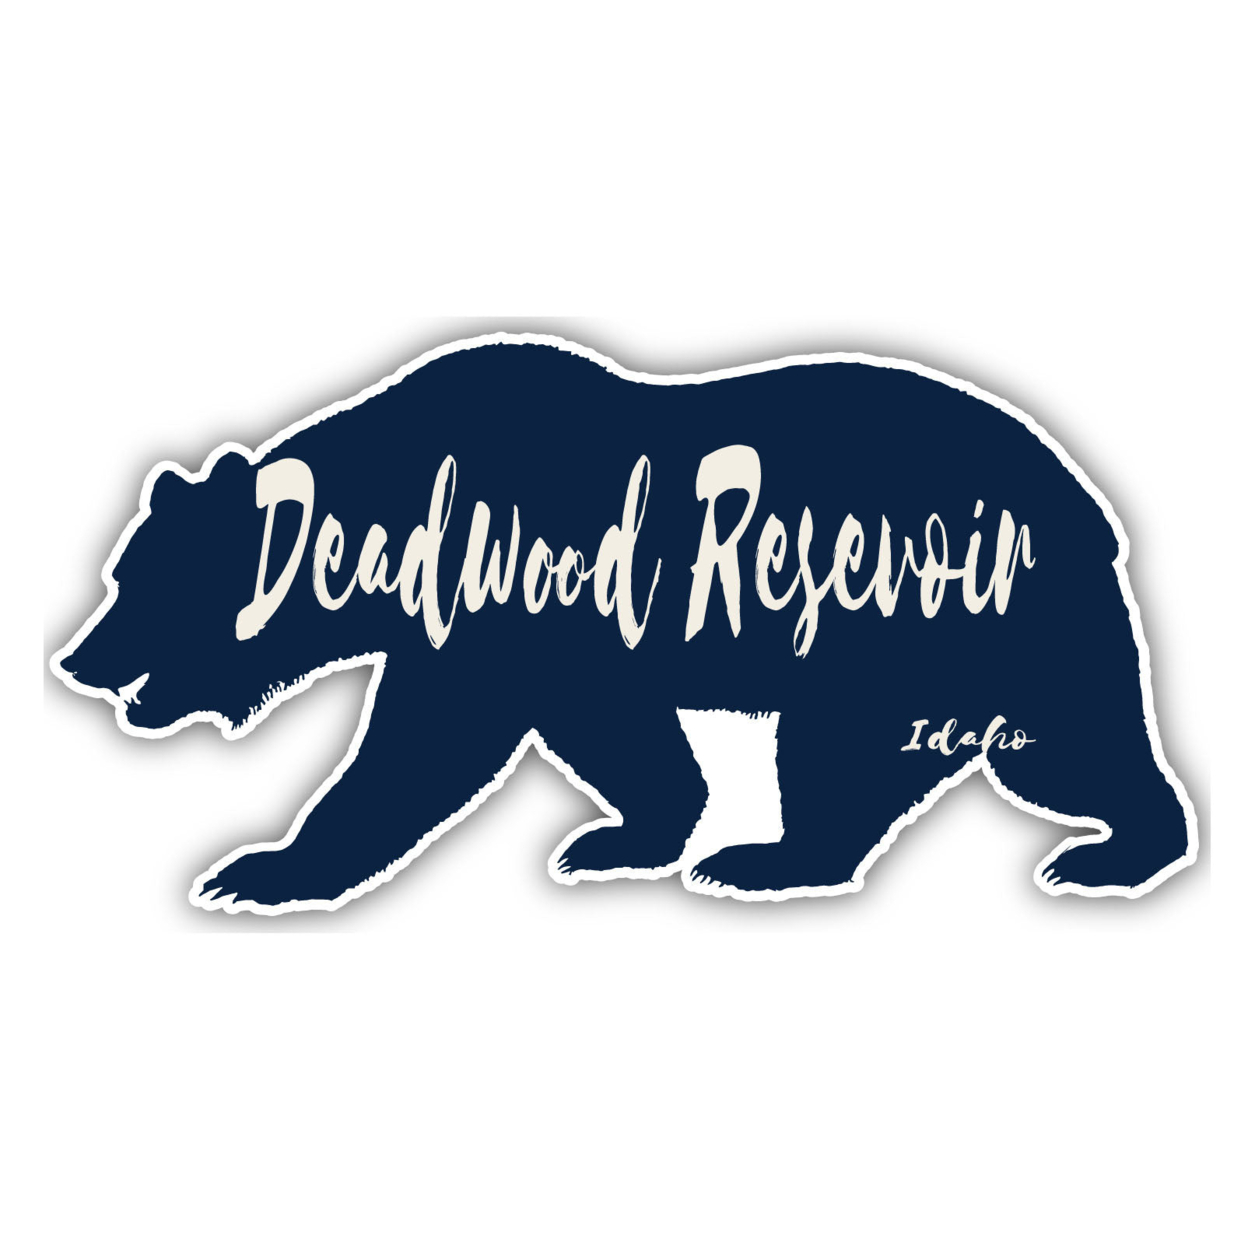 Deadwood Resevoir Idaho Souvenir Decorative Stickers (Choose Theme And Size) - 4-Pack, 12-Inch, Bear